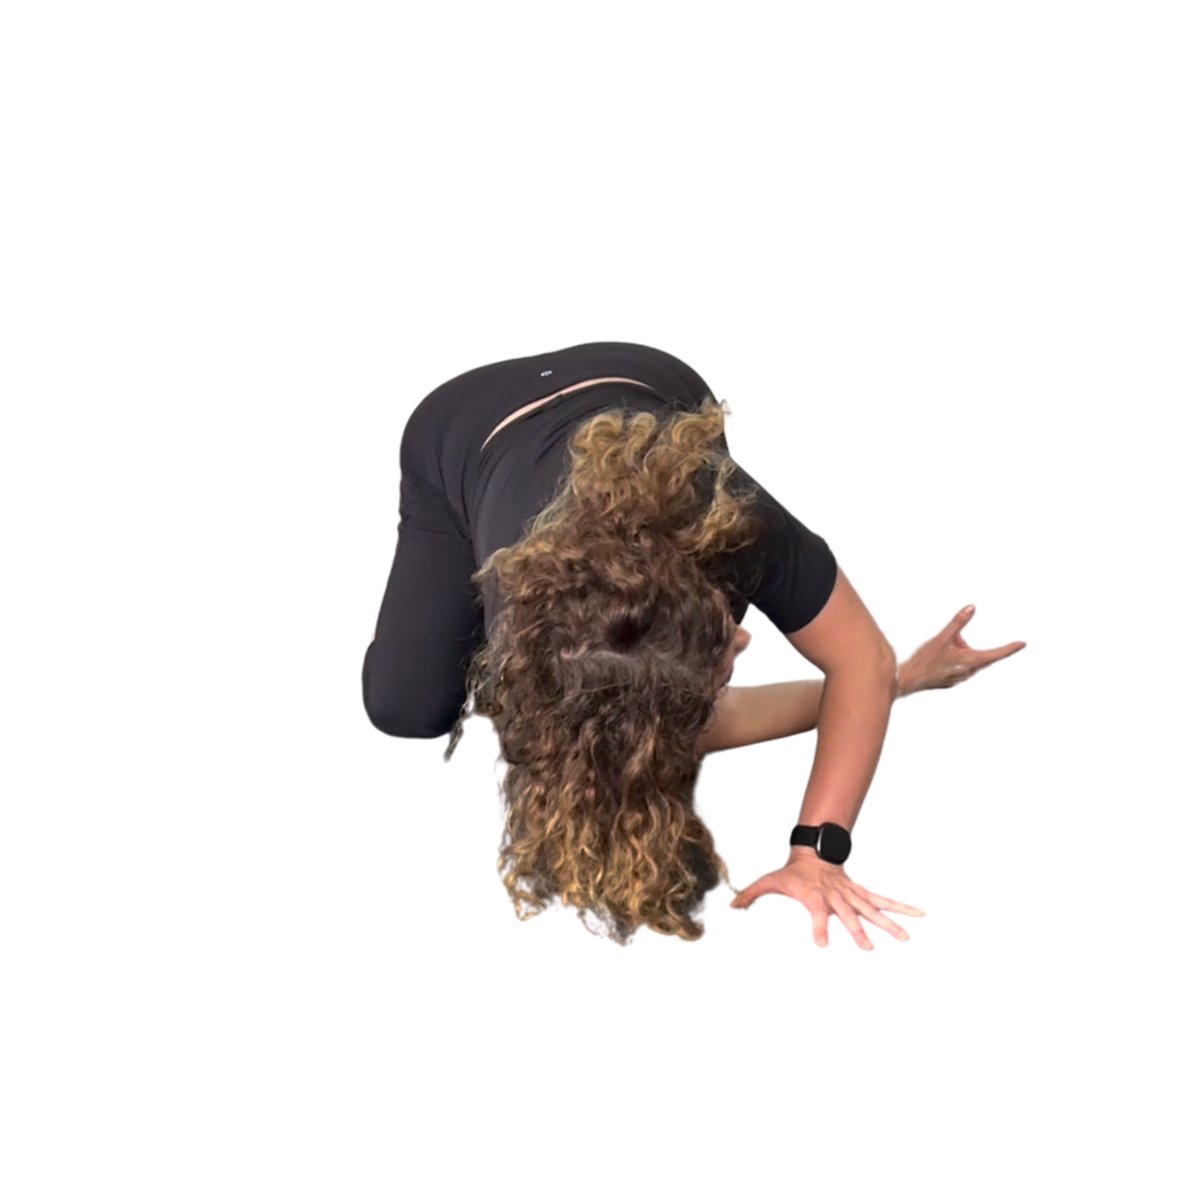 Learn About the World's Greatest Stretch: The Most Complete Full Body  Stretch